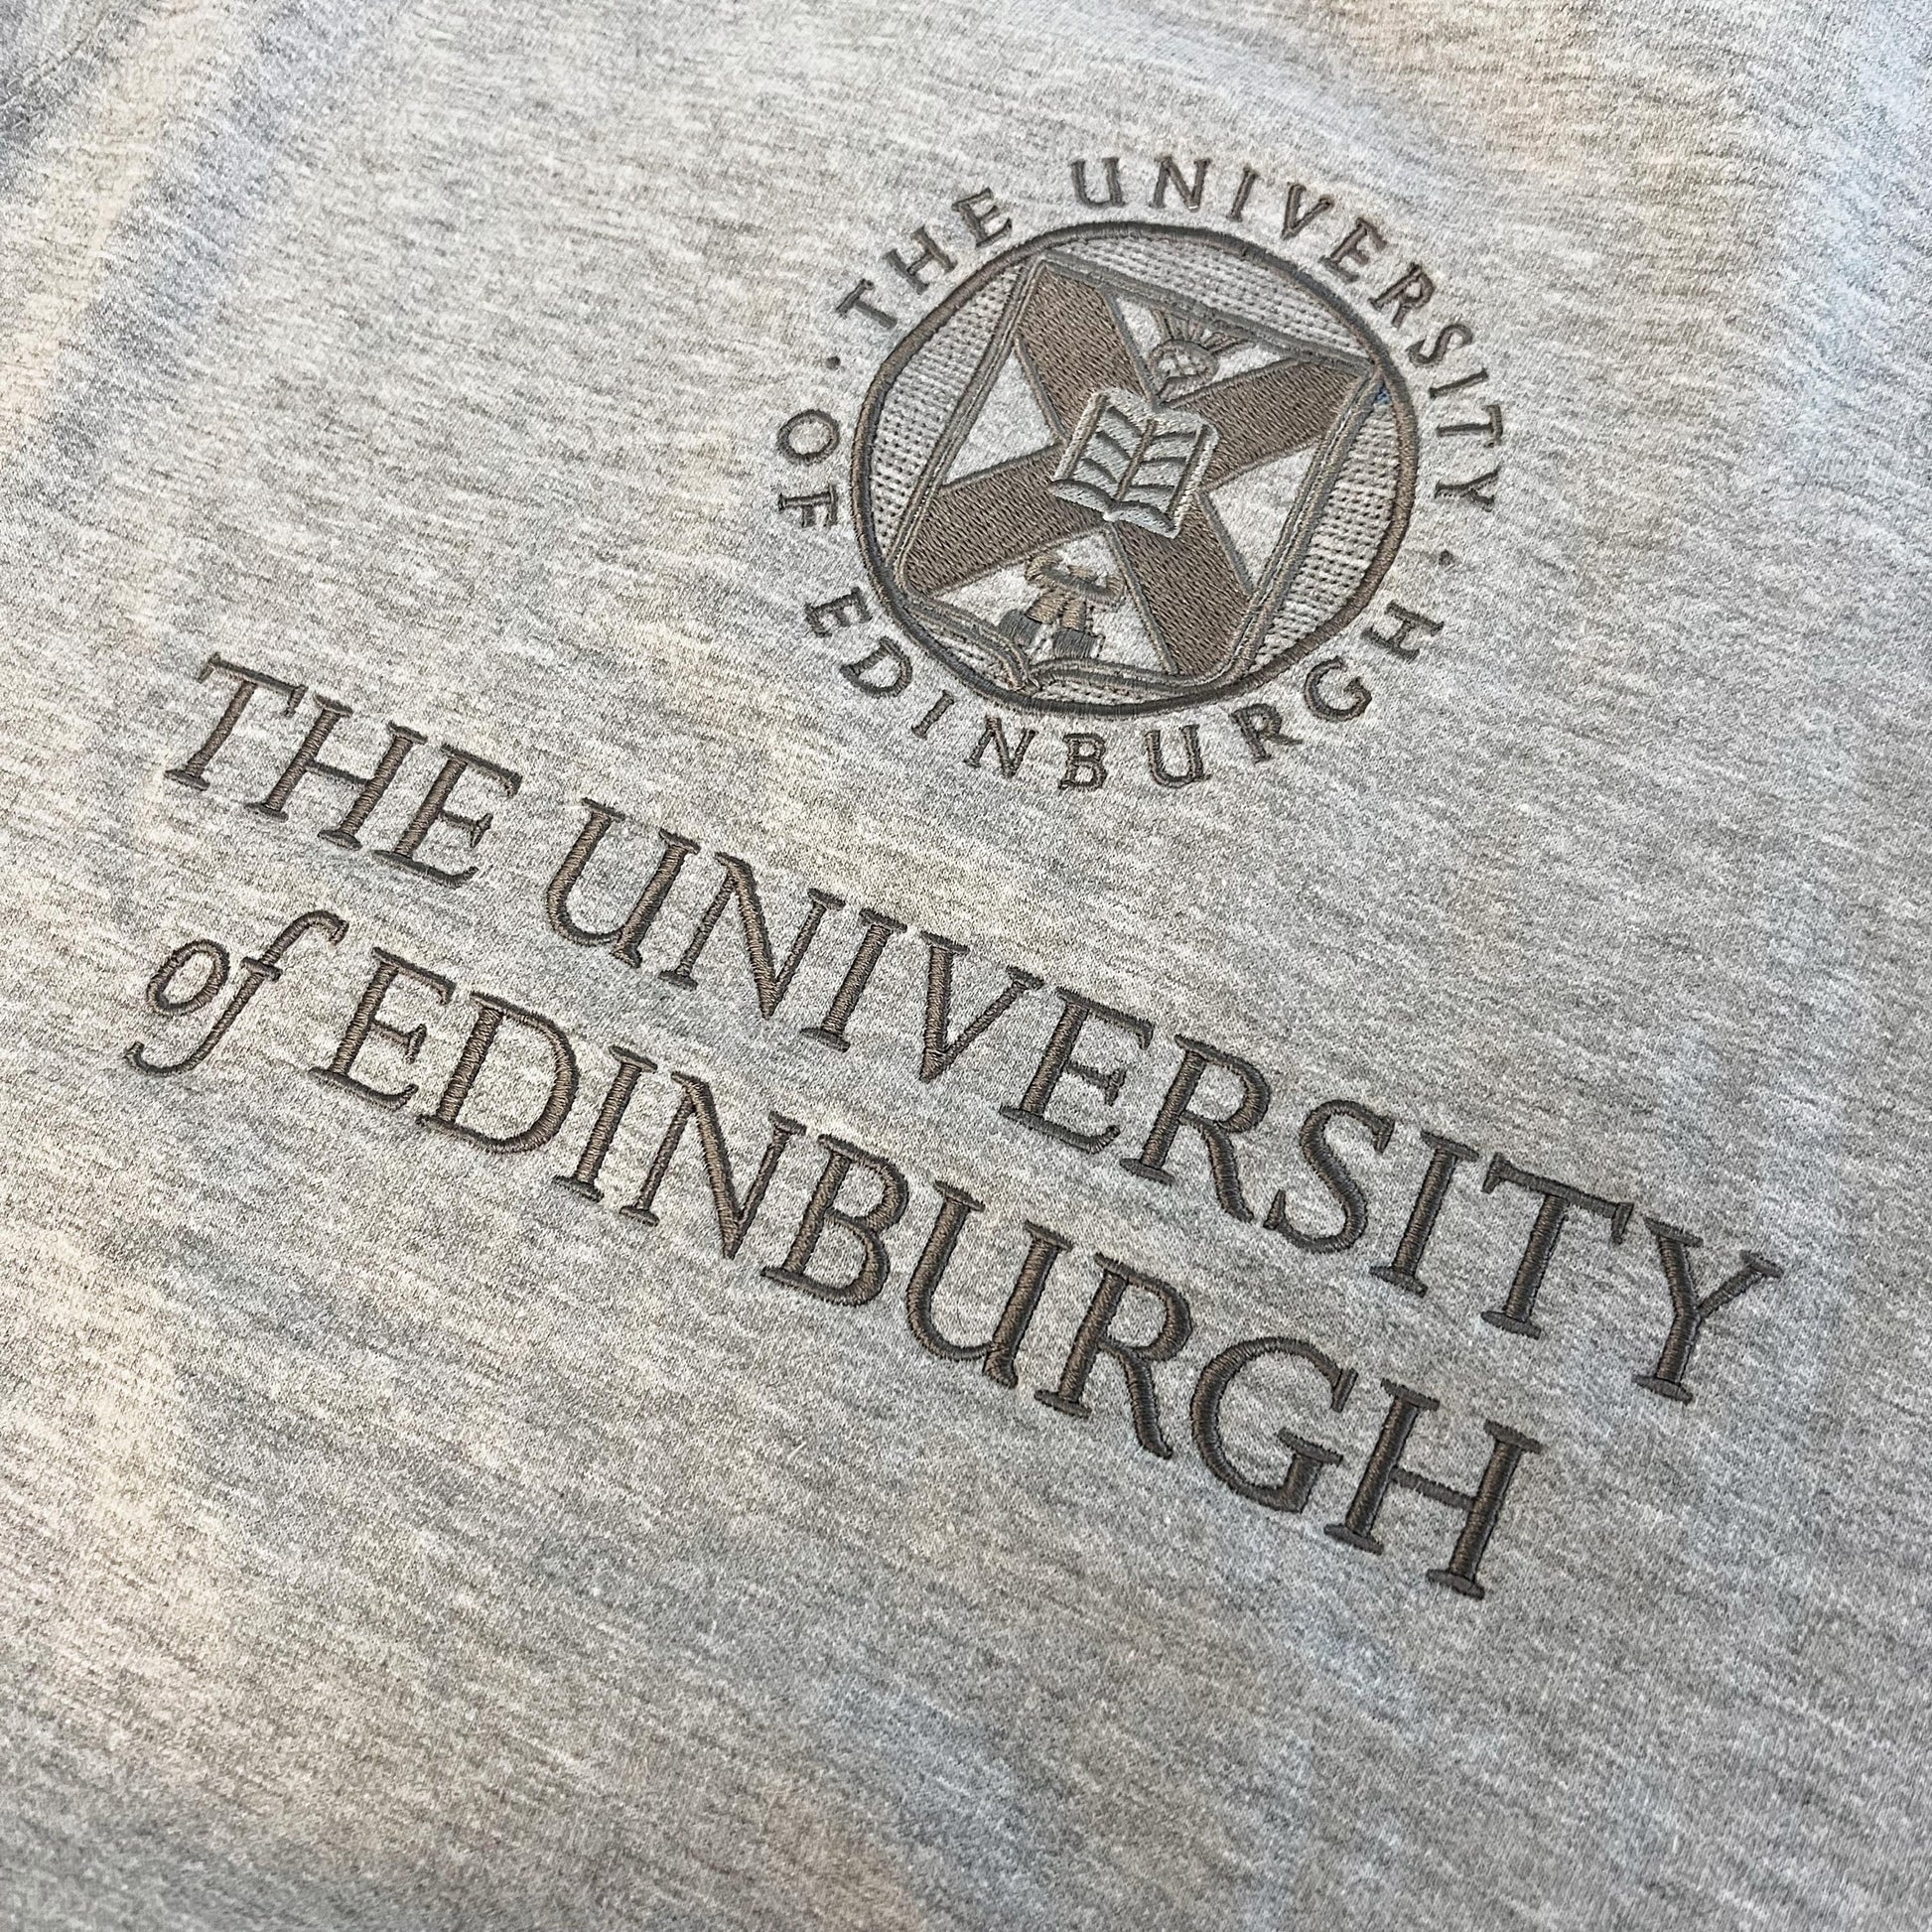 Close up image of the tonal embroidery of the University crest on a grey sweatshirt